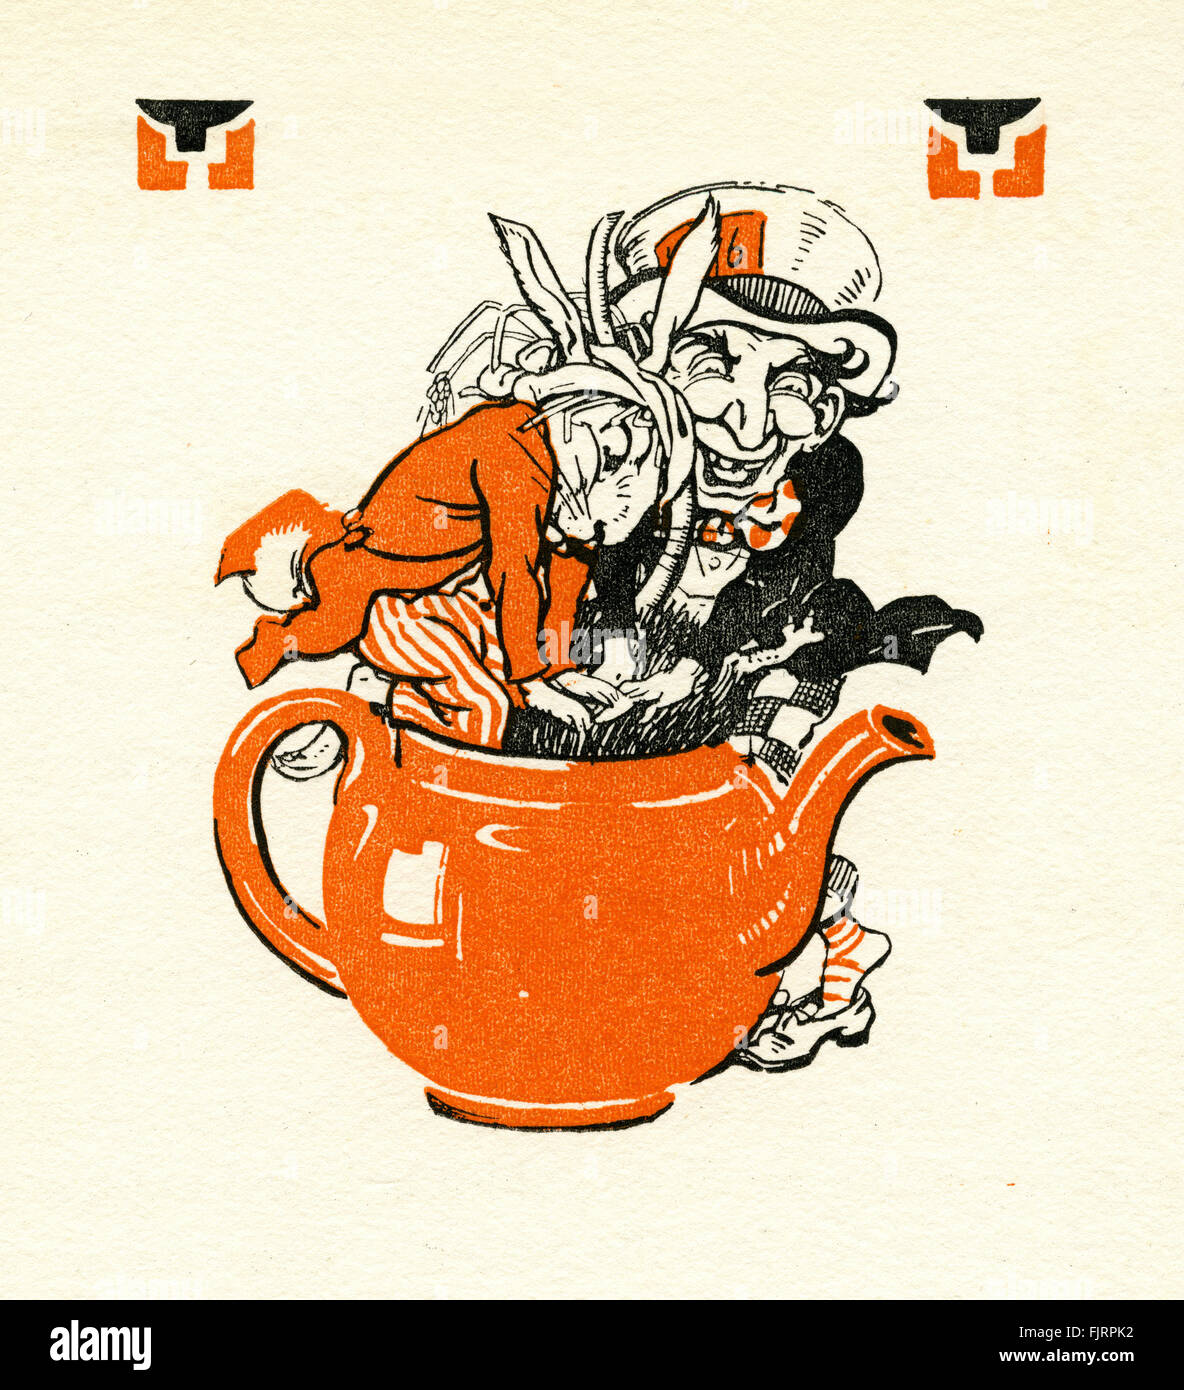 Alice's Adventures in Wonderland by Lewis Carroll. Illustrated by Gwynedd M Huson (dates not known).   Chapter8.  The mad hatter's tea party. The mad hatter and the doormous in the teapot. Chapter 8.  LC - British mathematician and author - real name Charles Lutwidge Dodgson: 27 January 1832 – 14 January 1898 Stock Photo